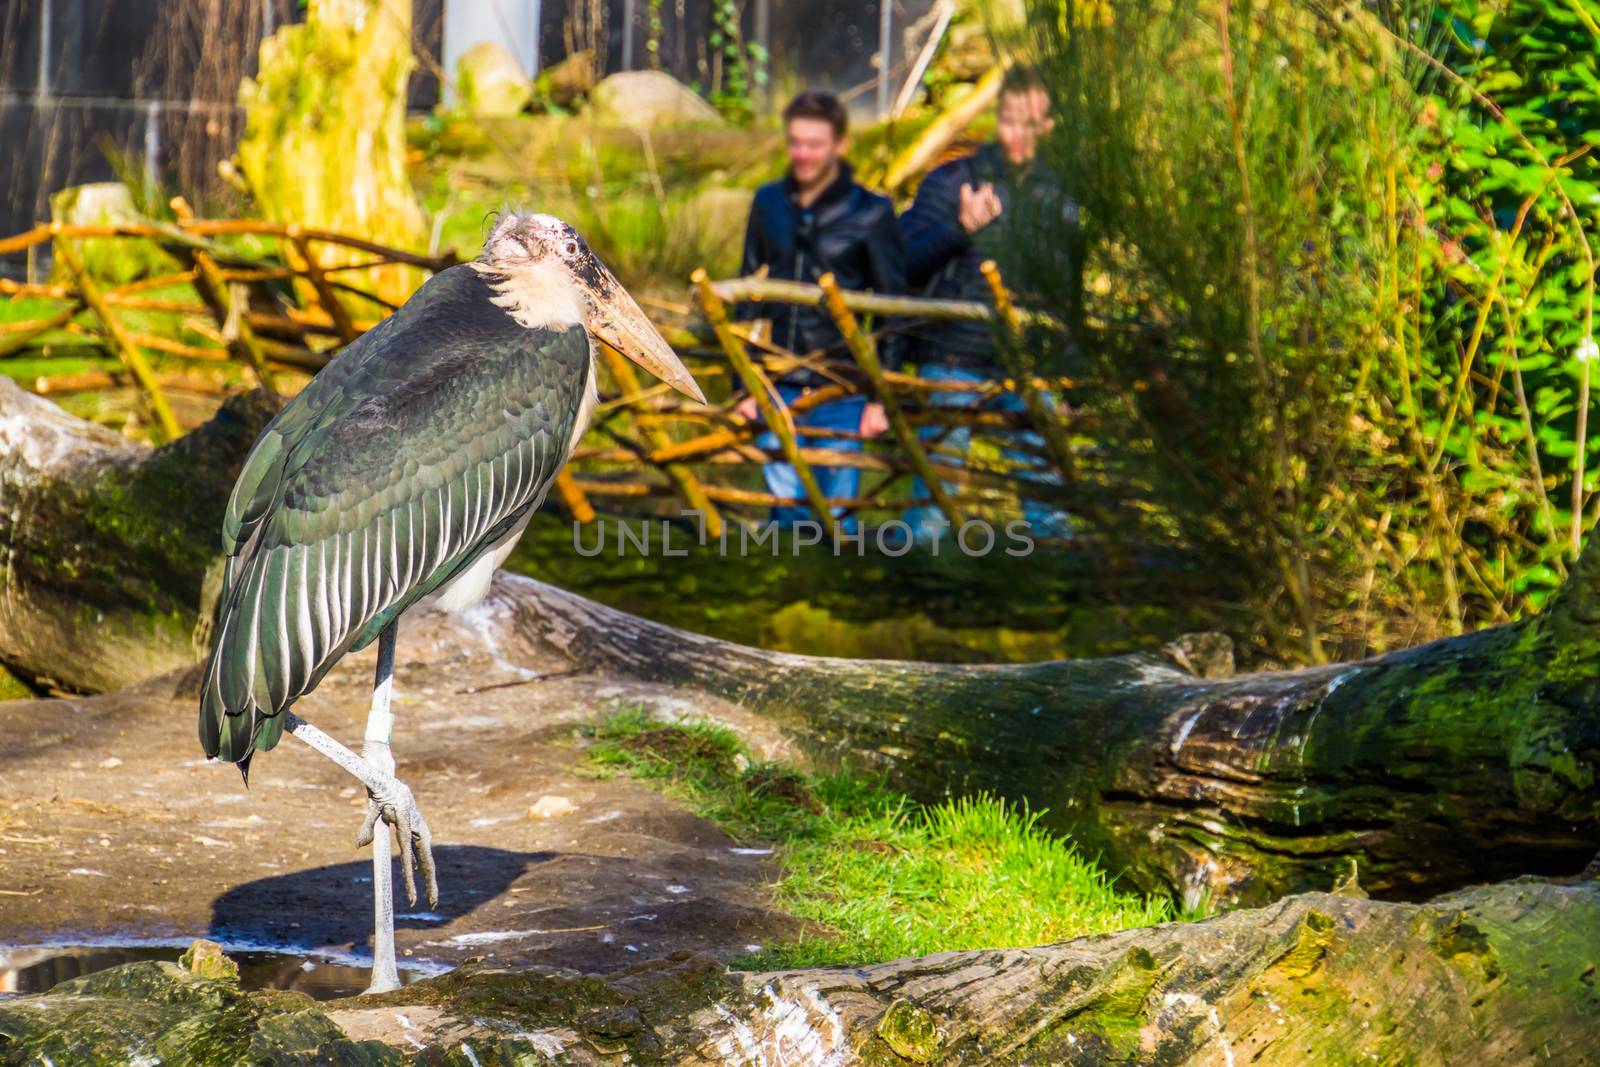 two men visiting the zoo and looking at a marabou stork, popular zoo animal by charlottebleijenberg